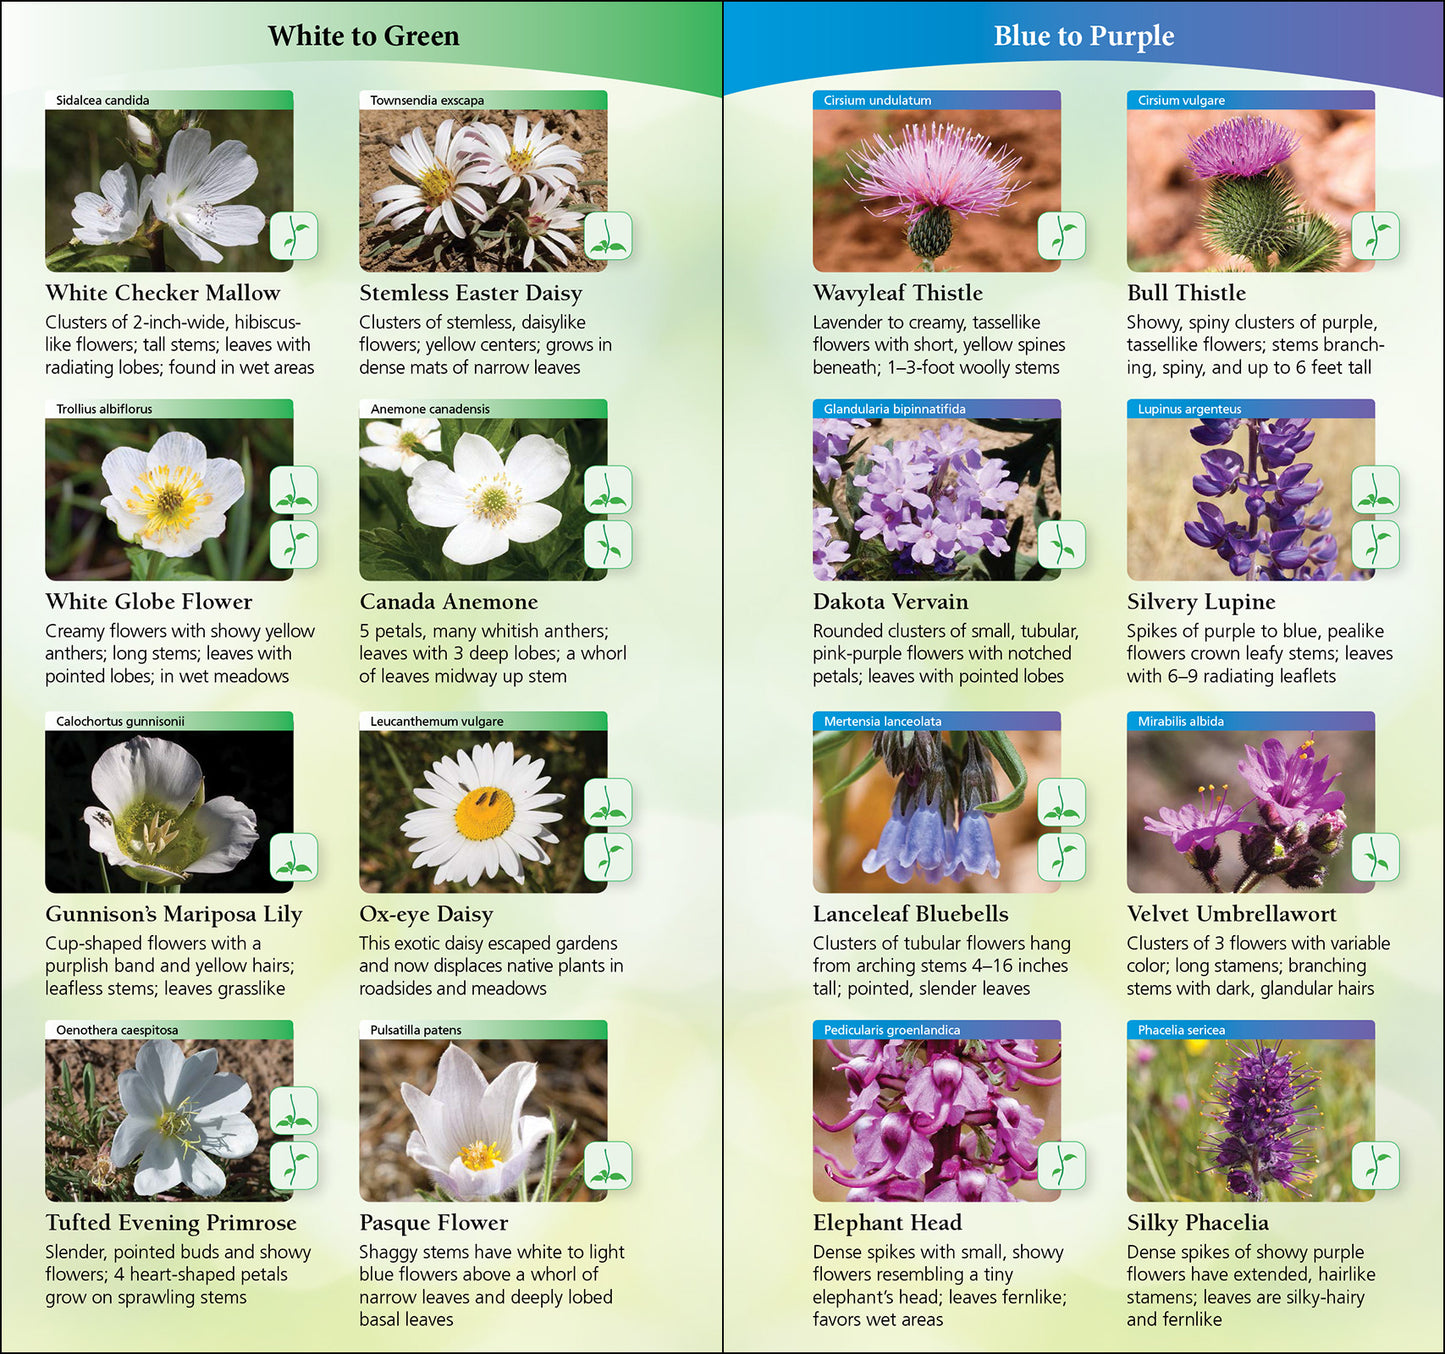 Wildflowers of Texas Quick Guide